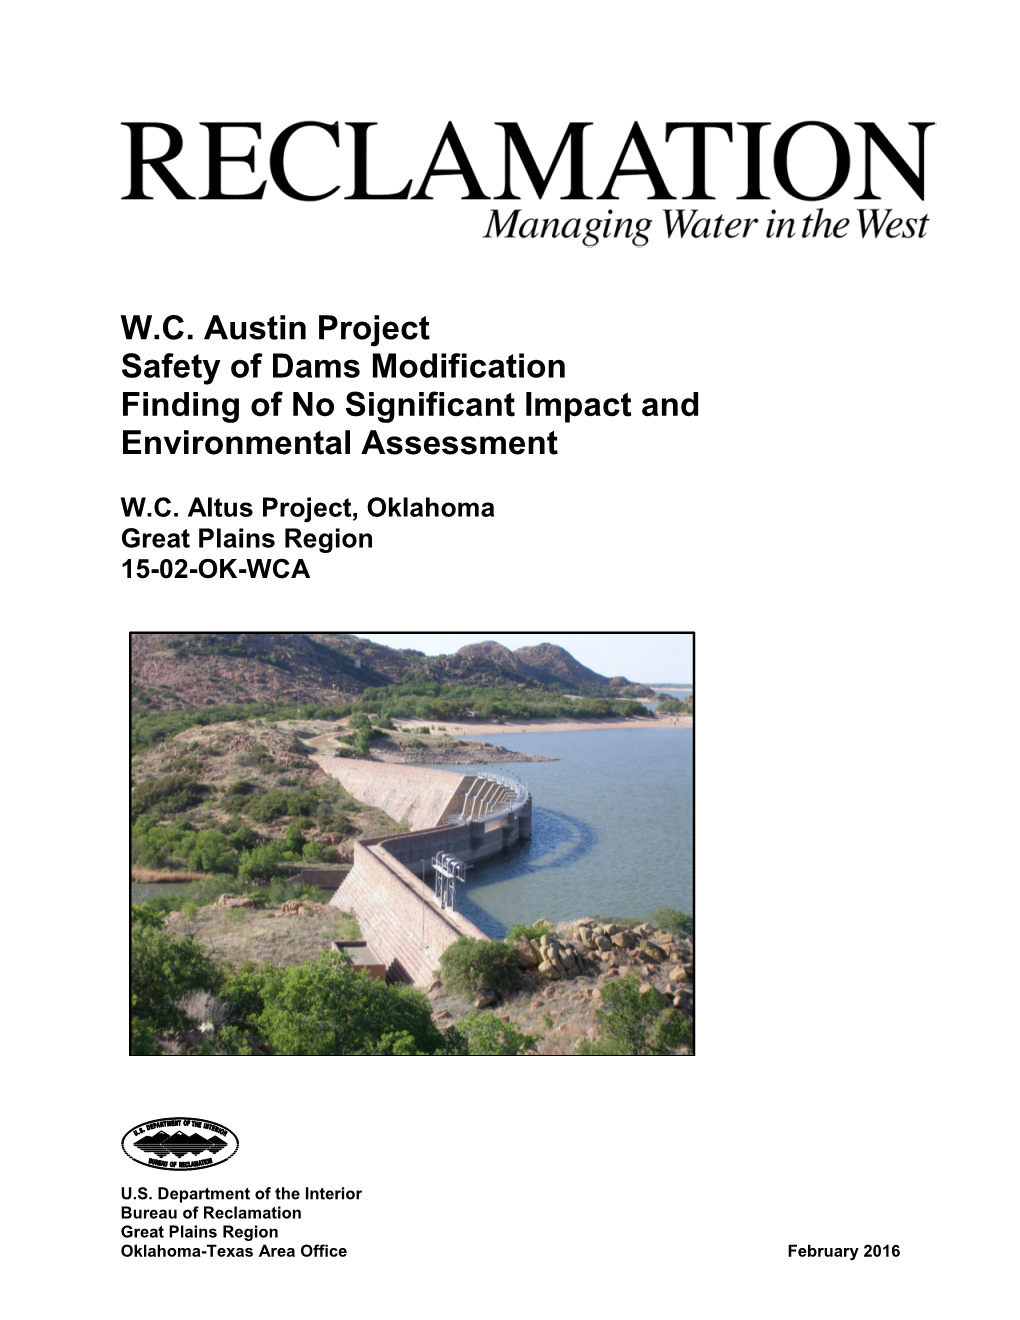 W.C. Austin Project Safety of Dams Modification Finding of No Significant Impact and Environmental Assessment